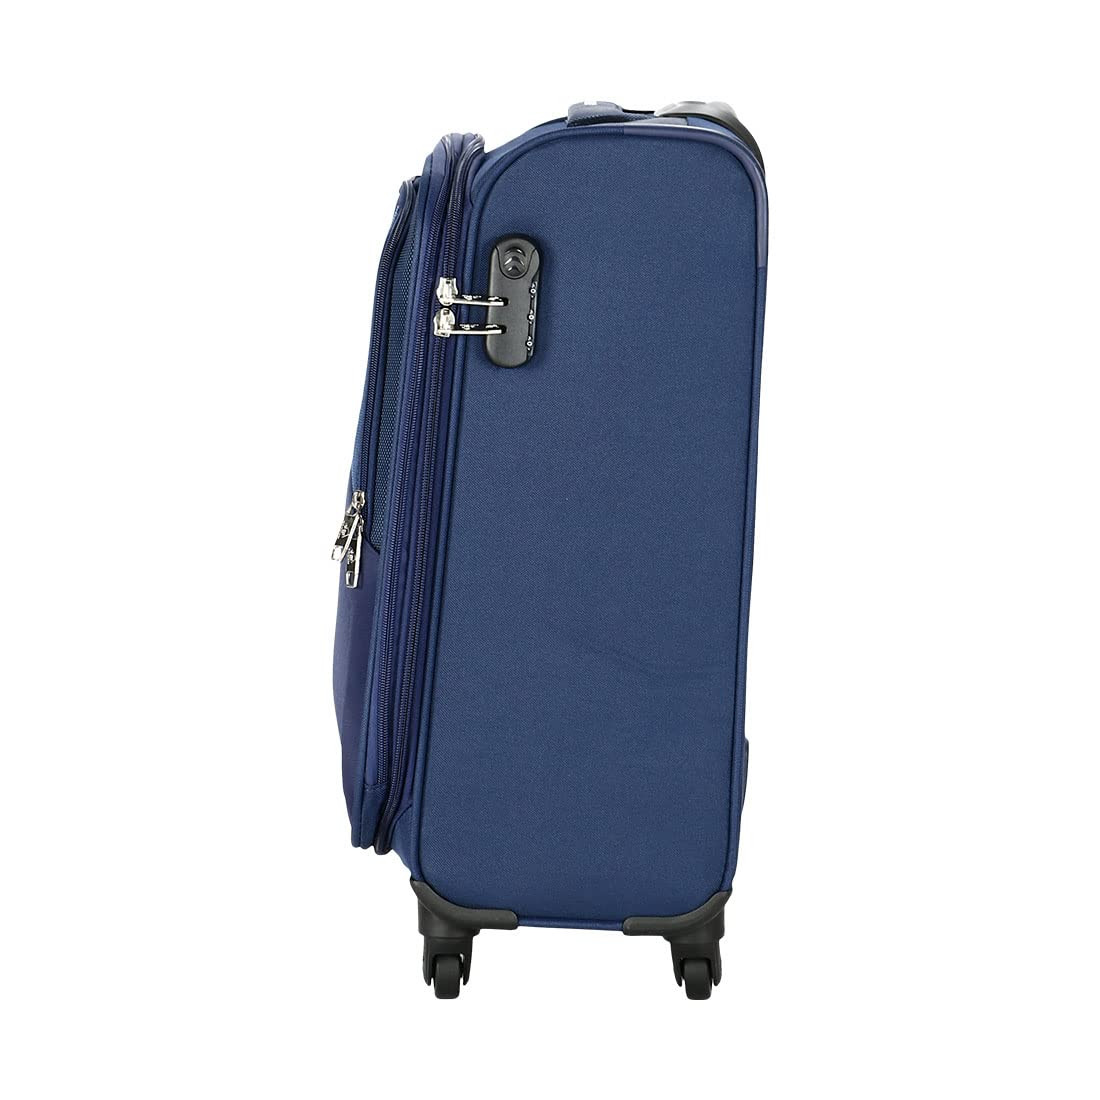 Kamiliant by American Tourister Kojo Polyester Soft Luggage Set of 3 Blue 56  68  78 Cm